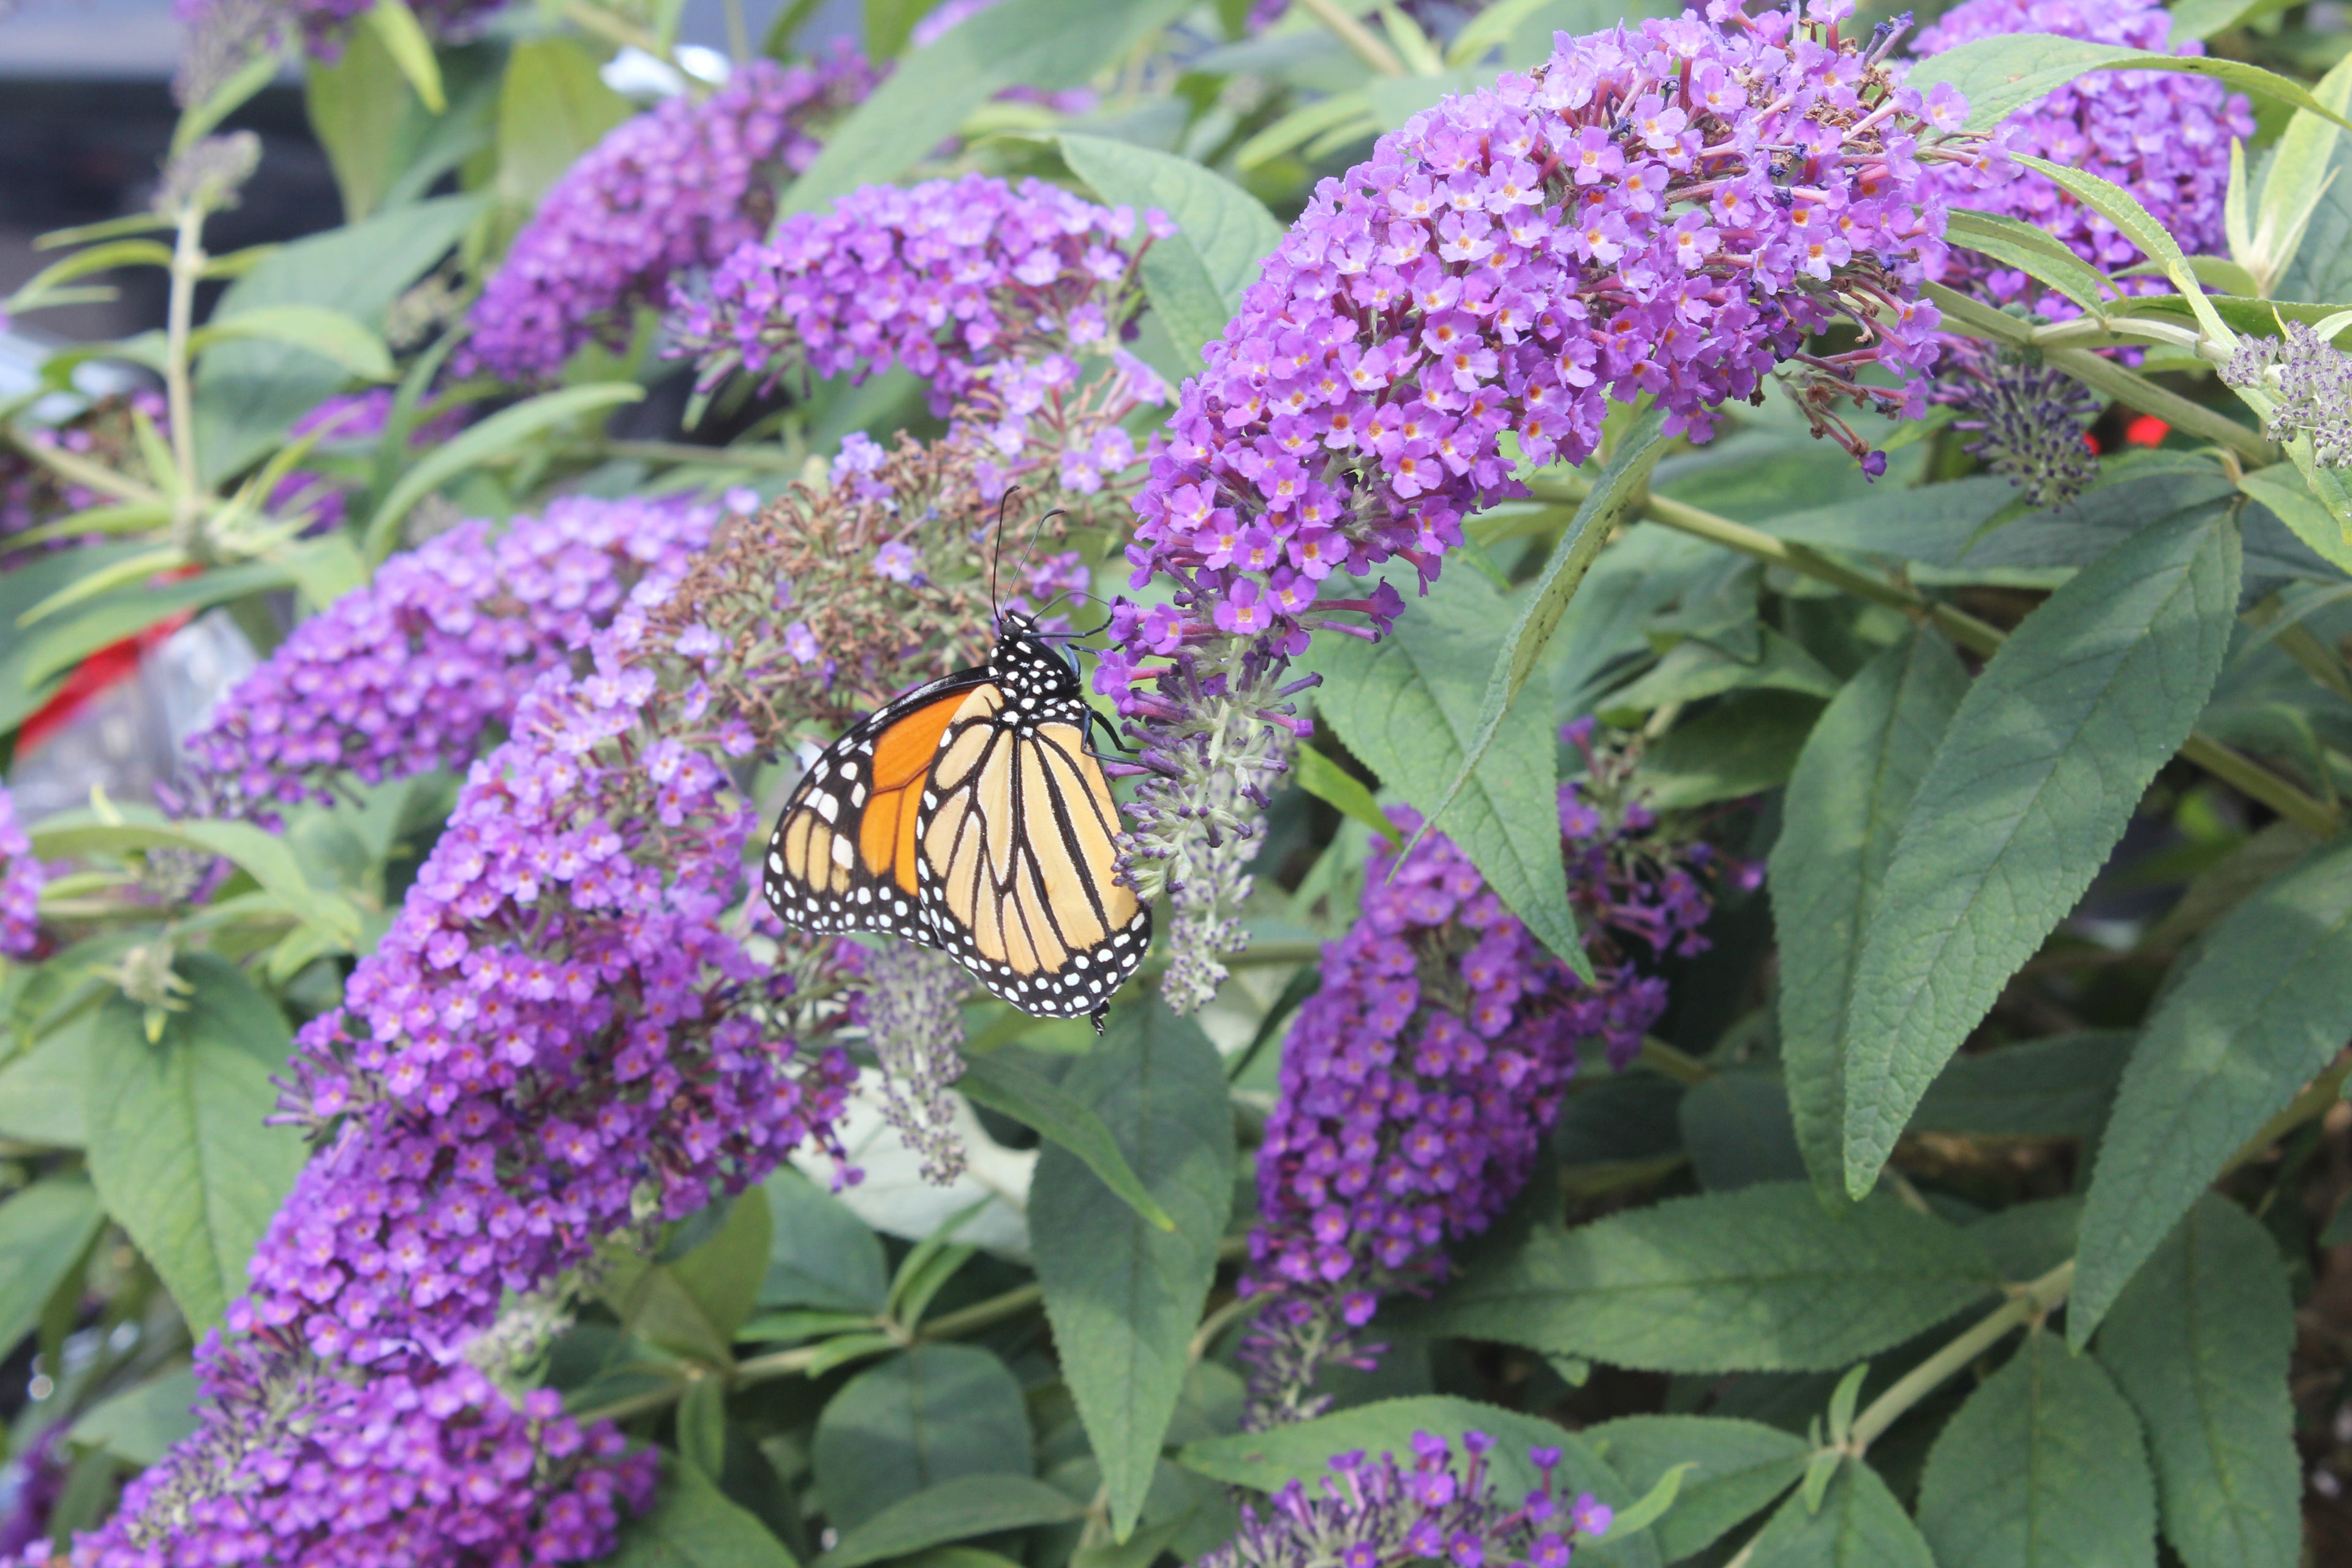 Buddleia Lo &amp; Behold Purple Haze attracts pollinators in droves